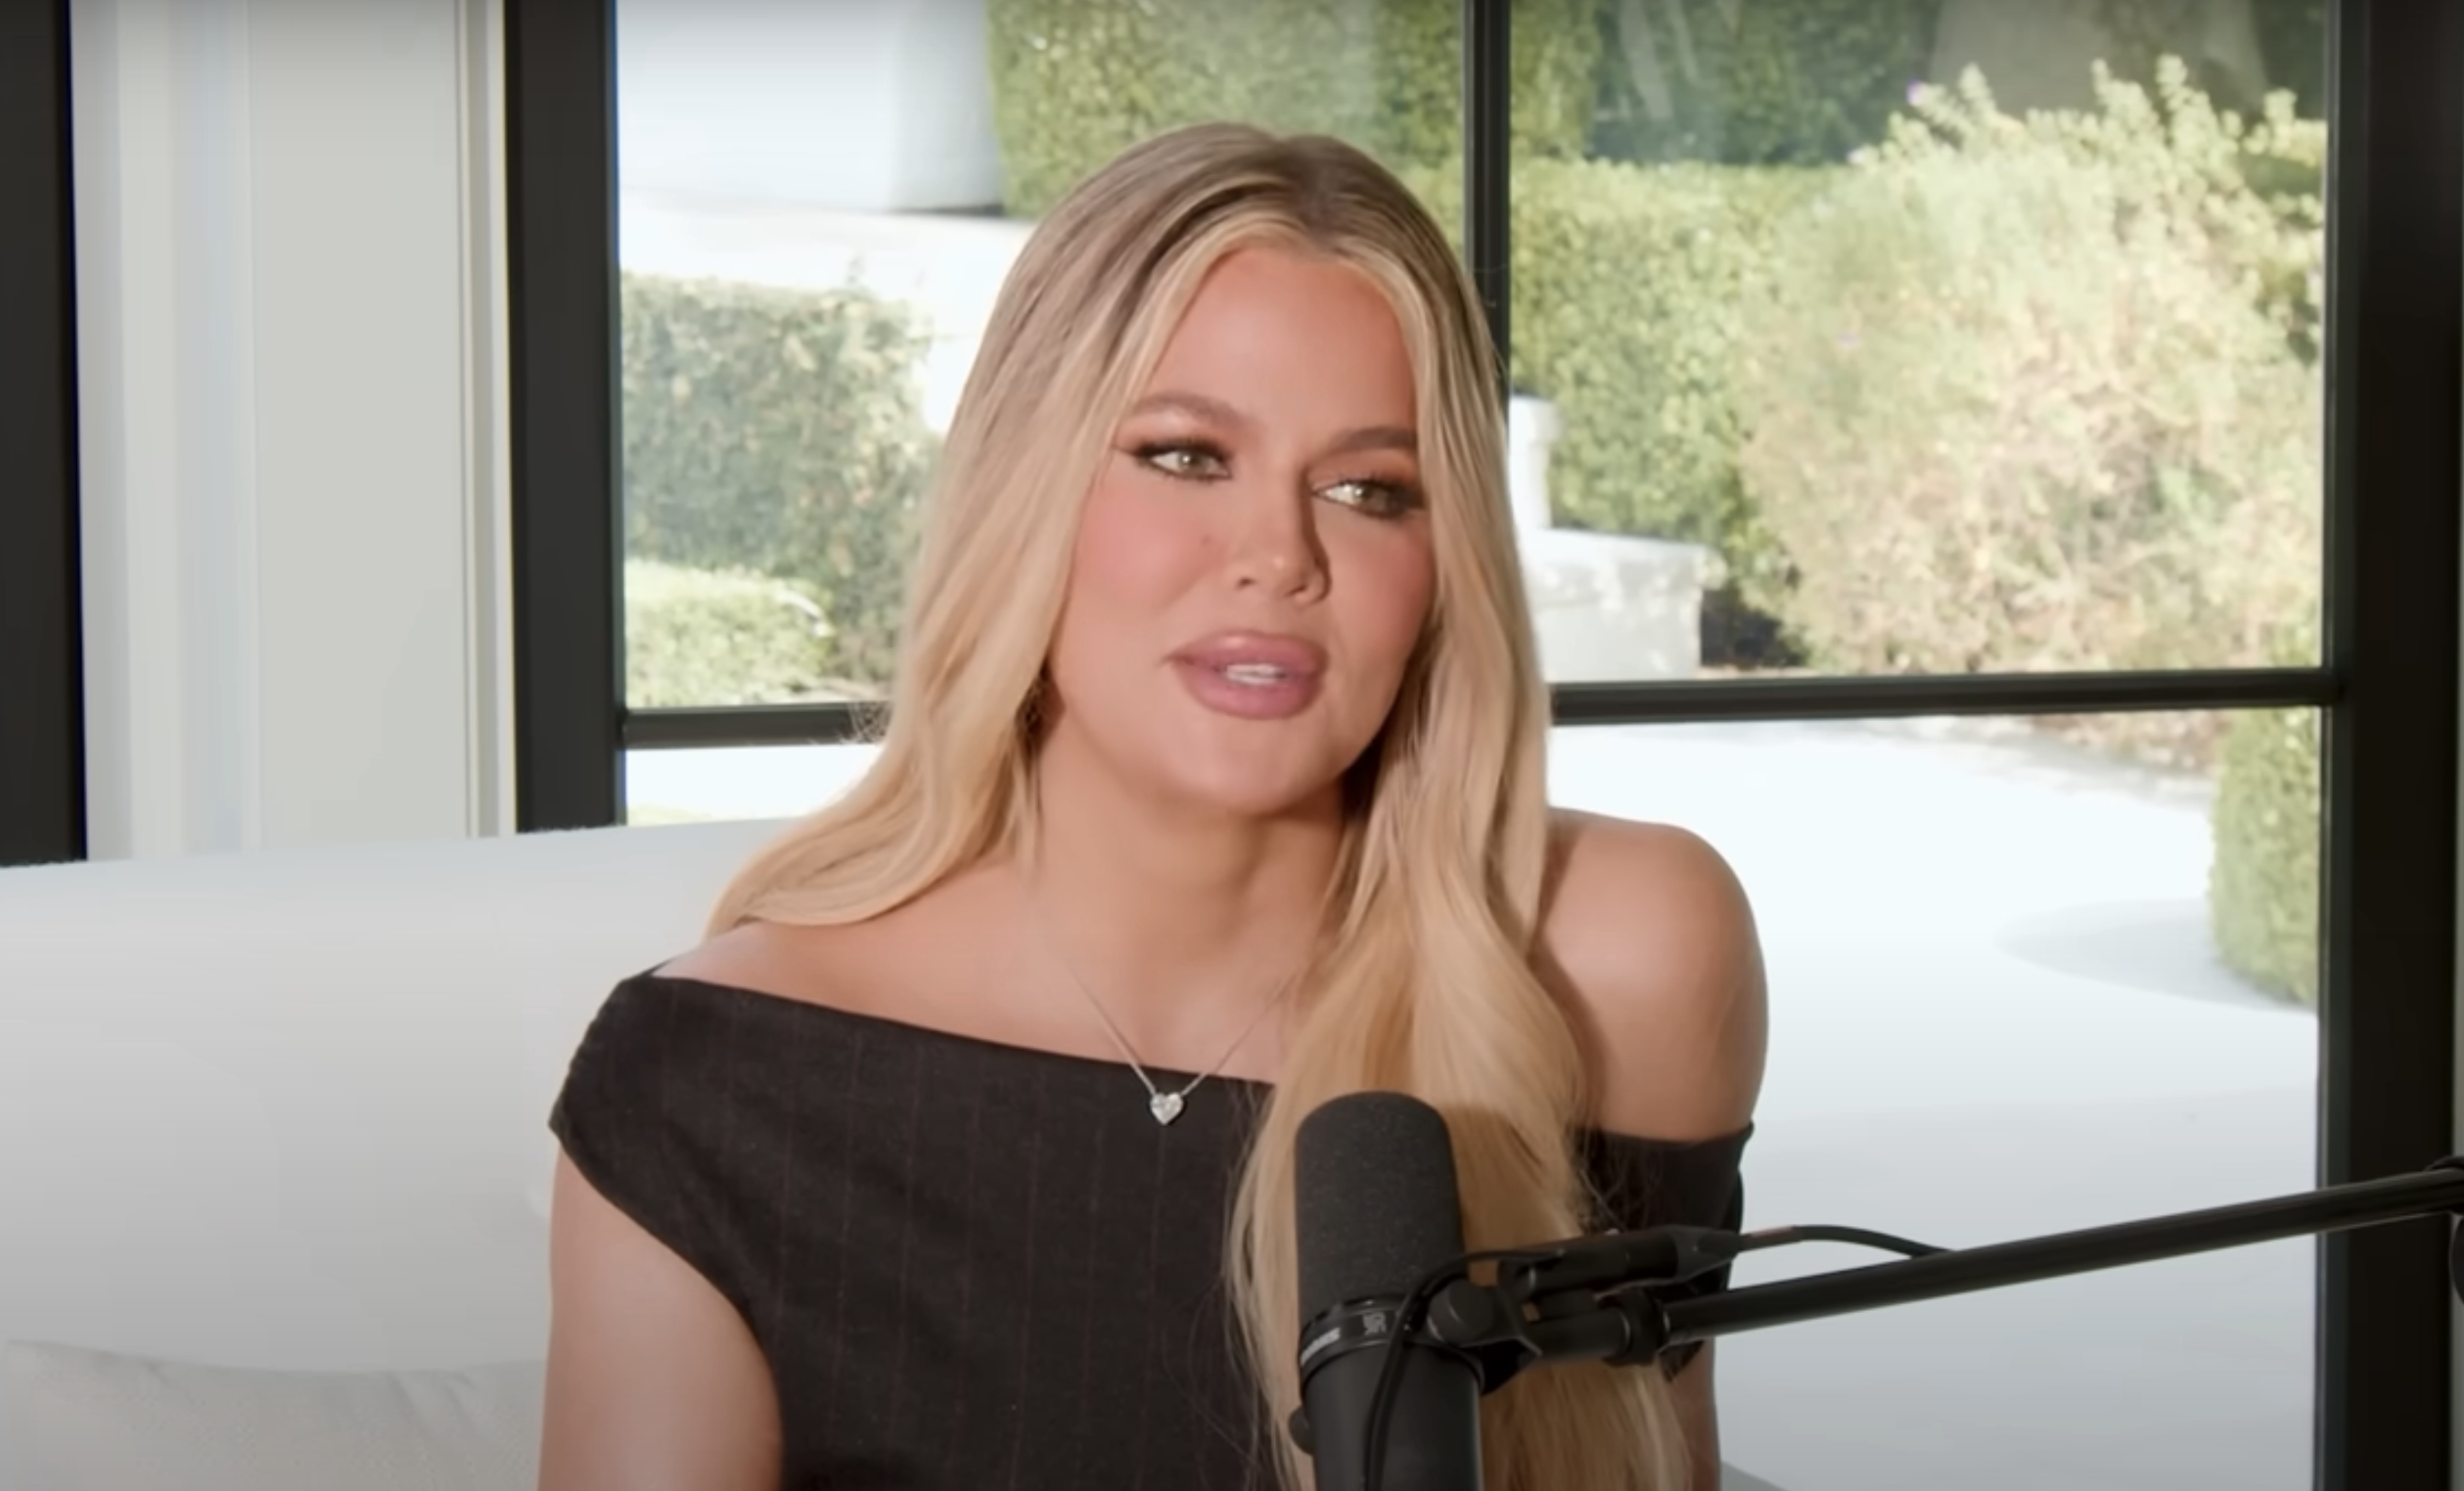 Khloé Kardashian Said That People Finding Out About Her Second Child With Tristan Thompson Was Her “Biggest Fear” Because She Was So “Ashamed”